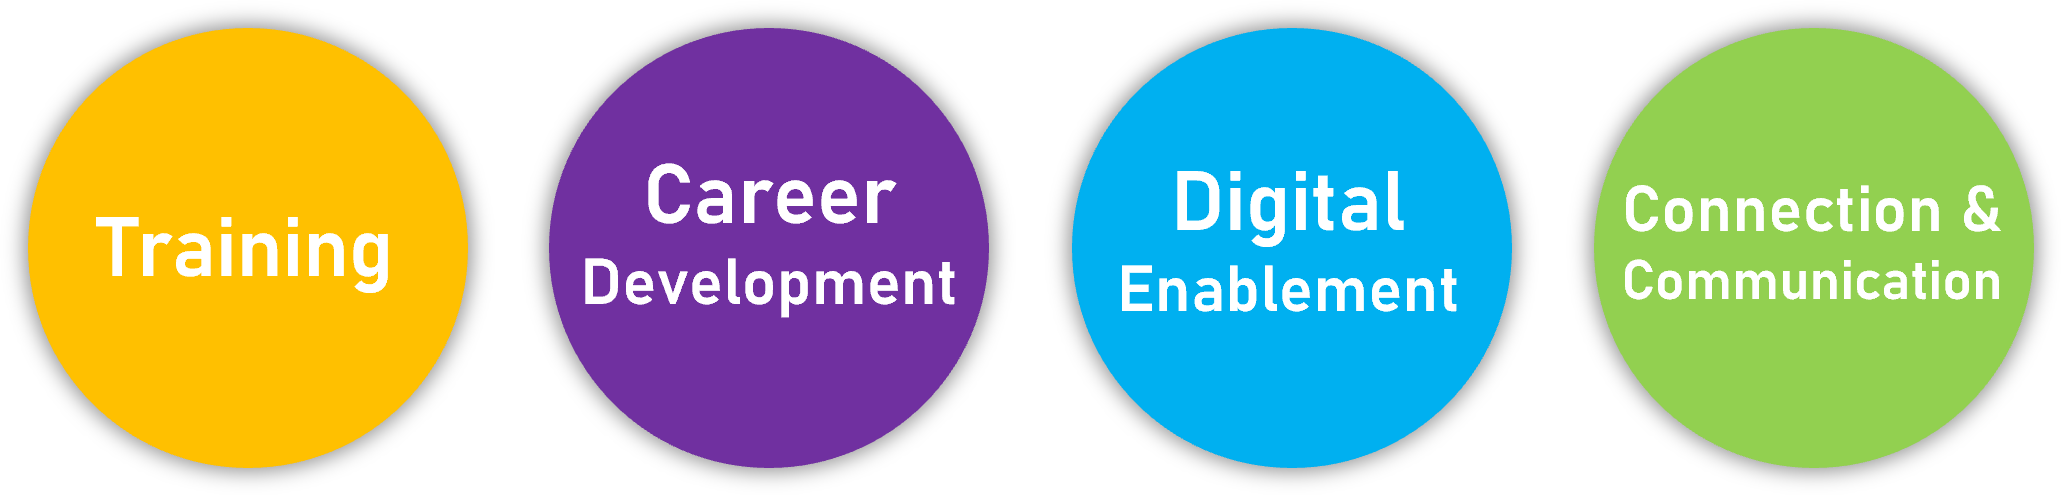 Circle diagrams on training, career development, digital enablement and connection & communication